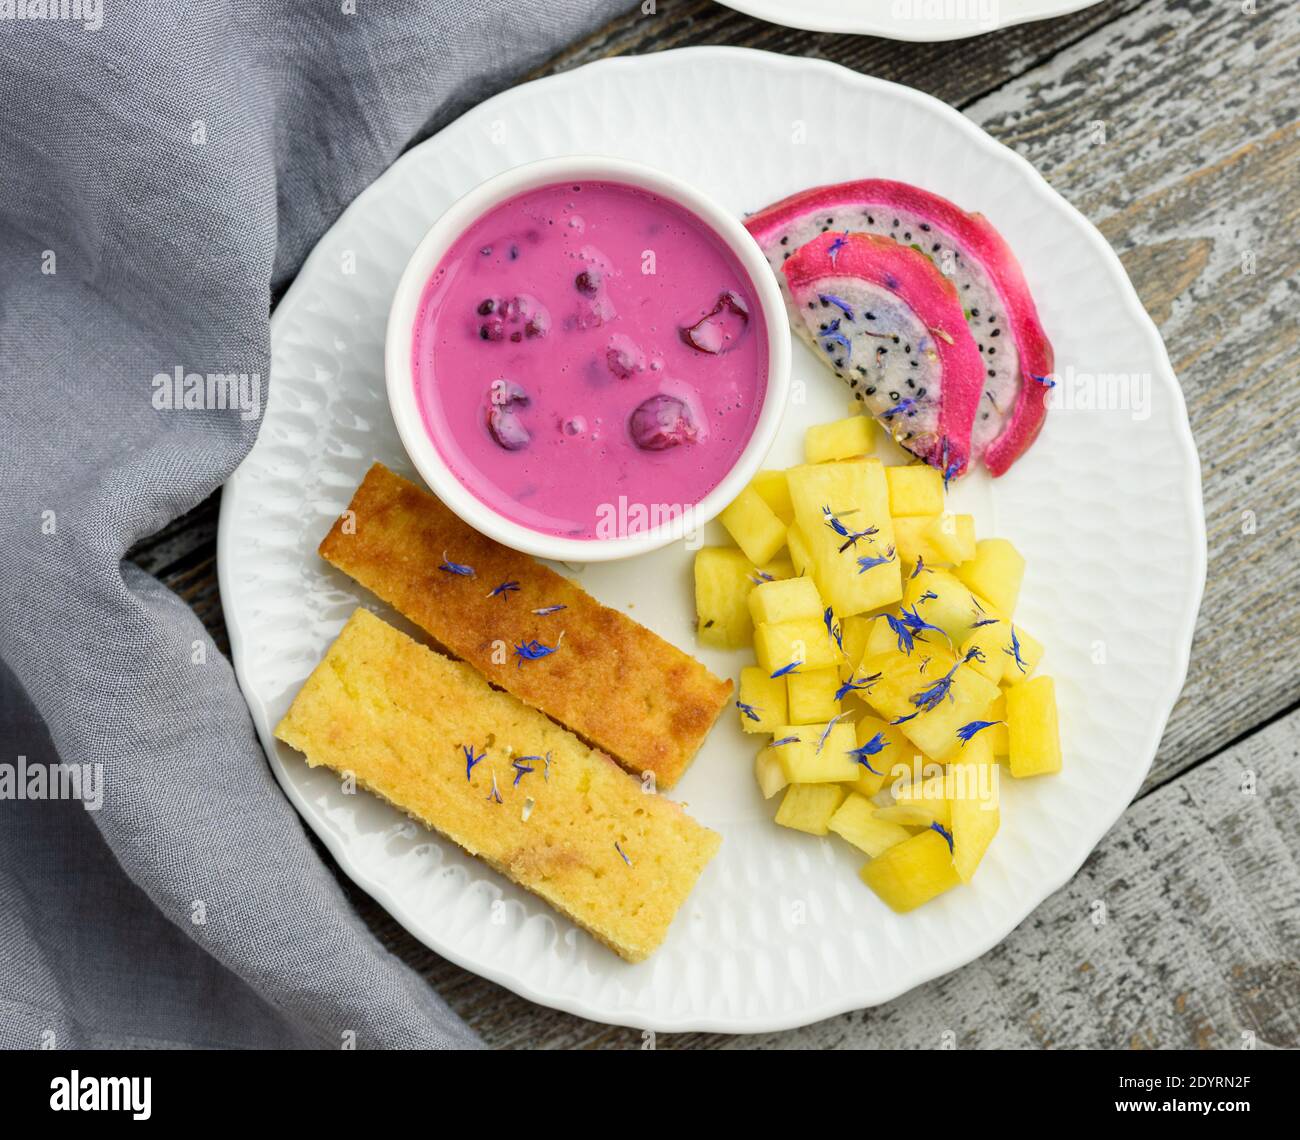 Mango bread with plant-based yogurt and fresh fruits, bright colors, colourful meal, flat lay Stock Photo